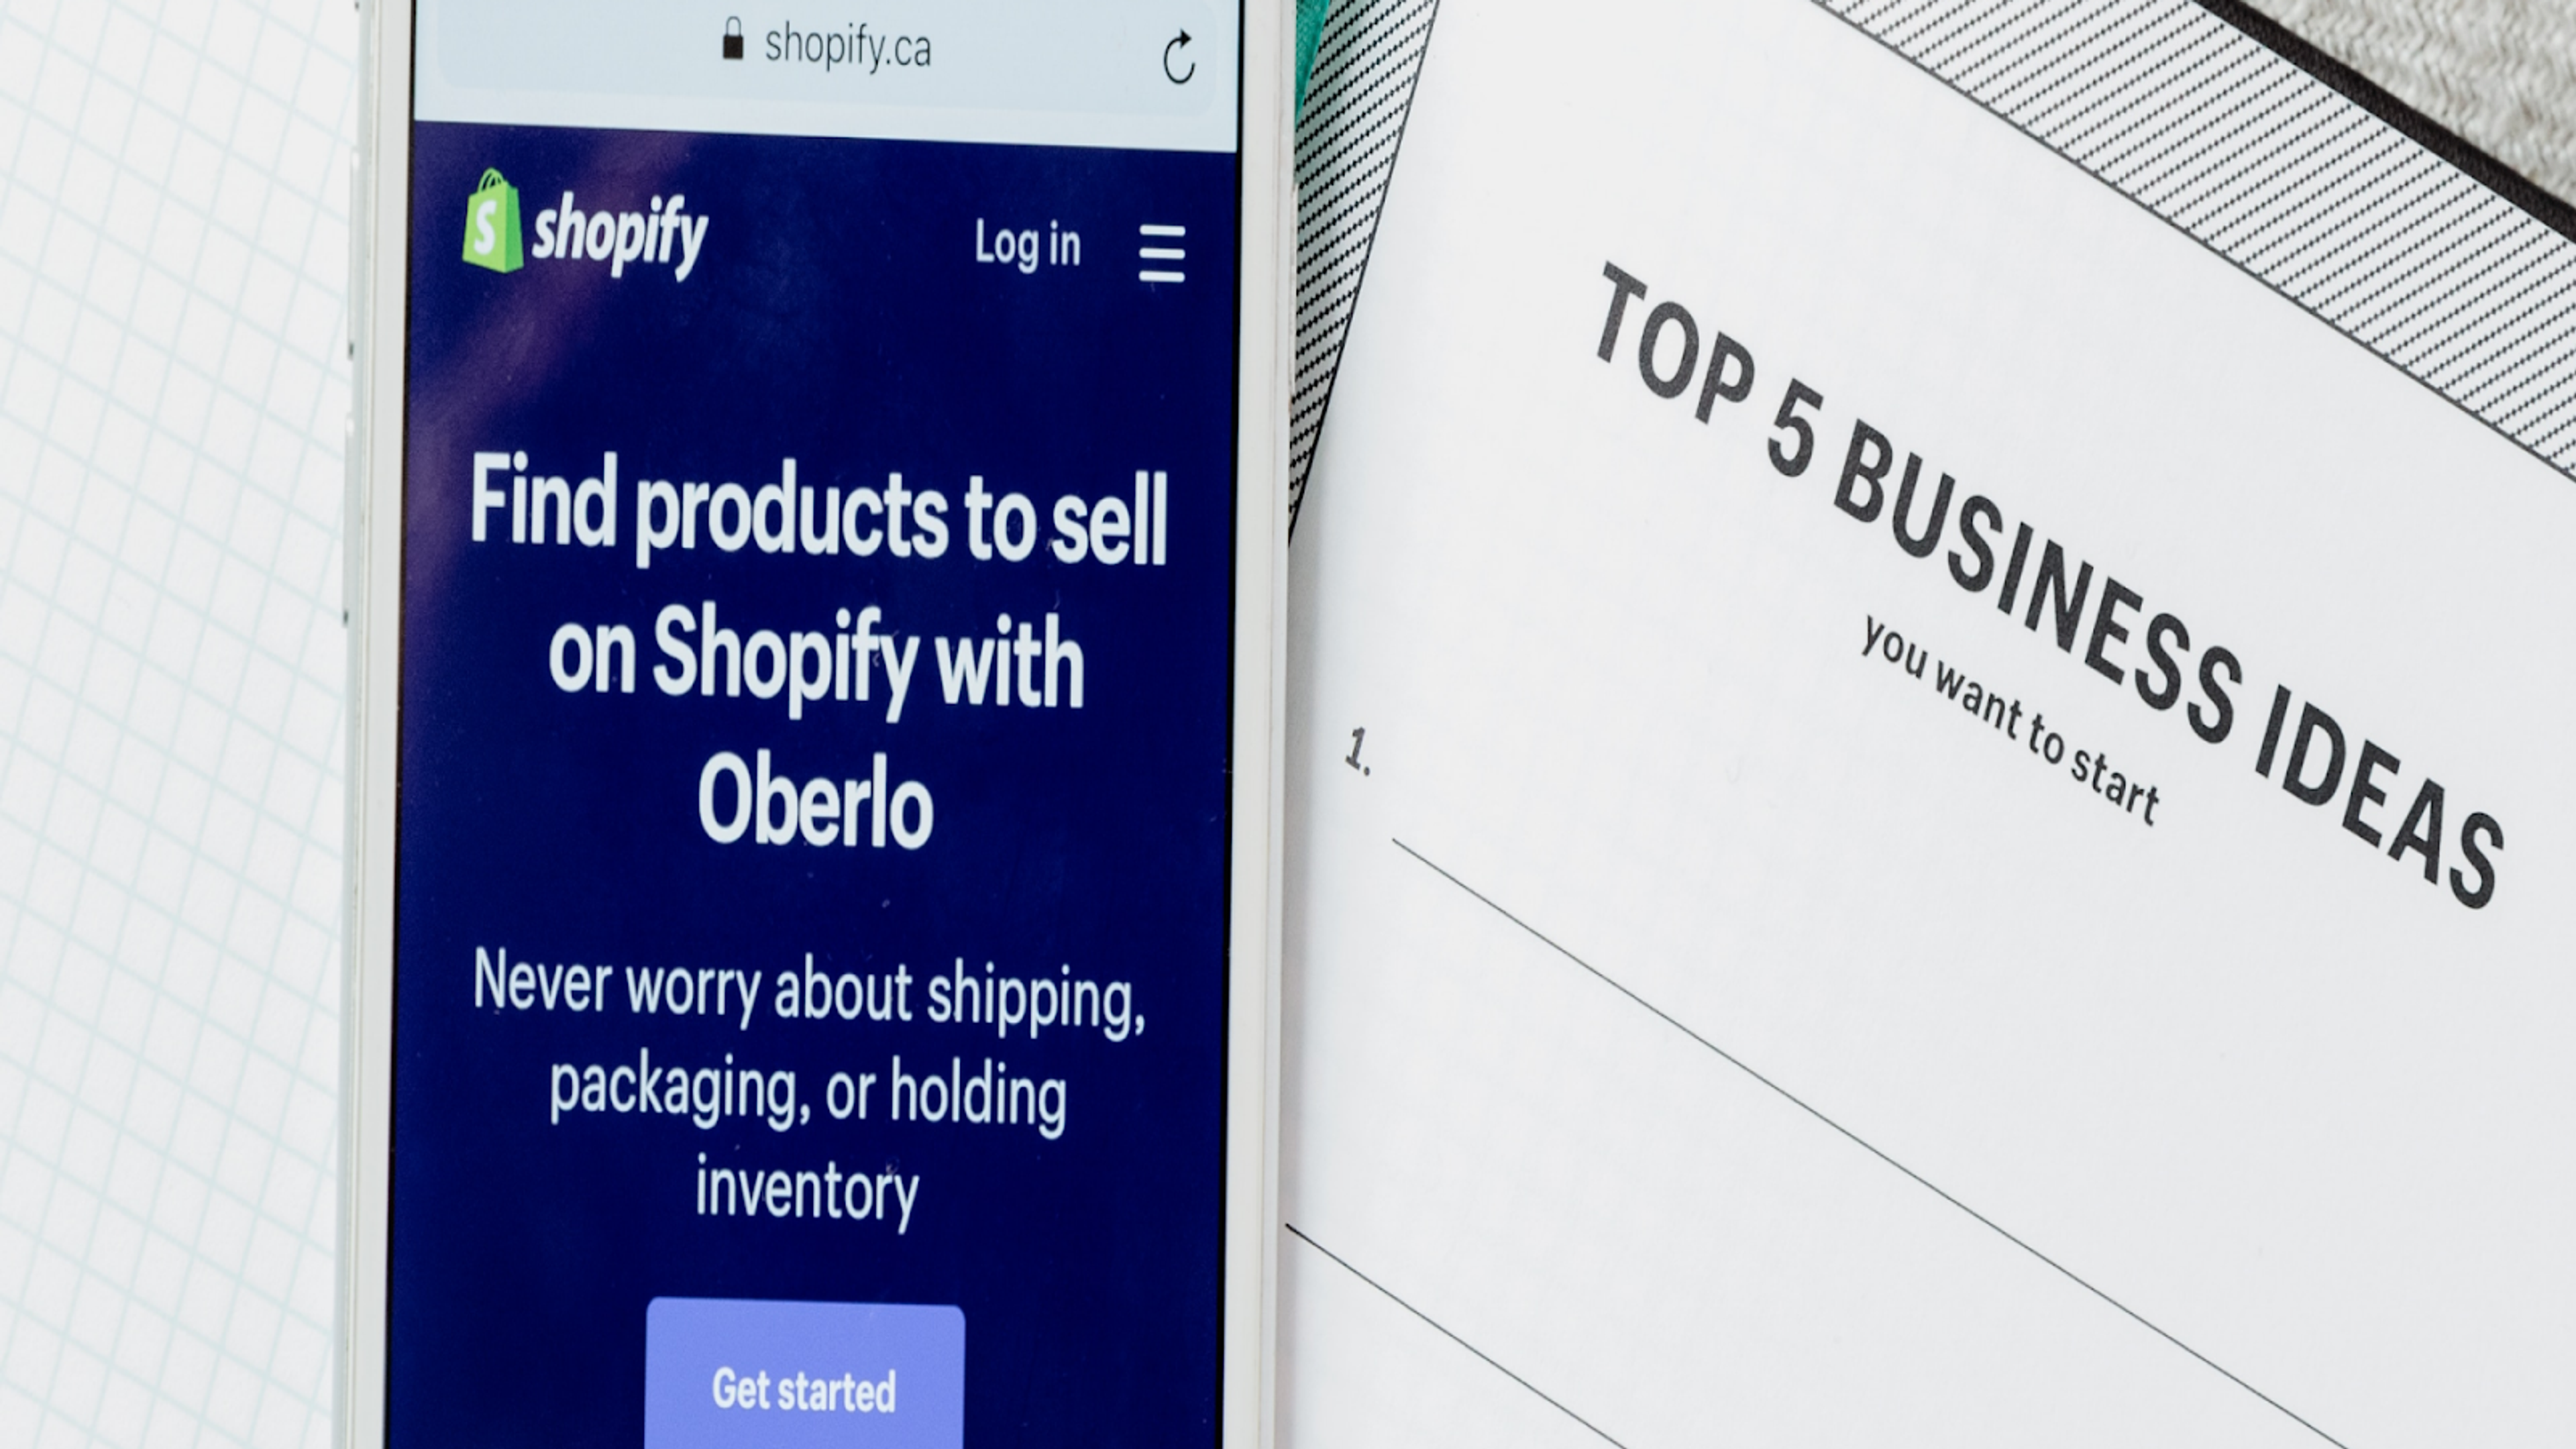 What Is The Current Environment of Shopify Domain?